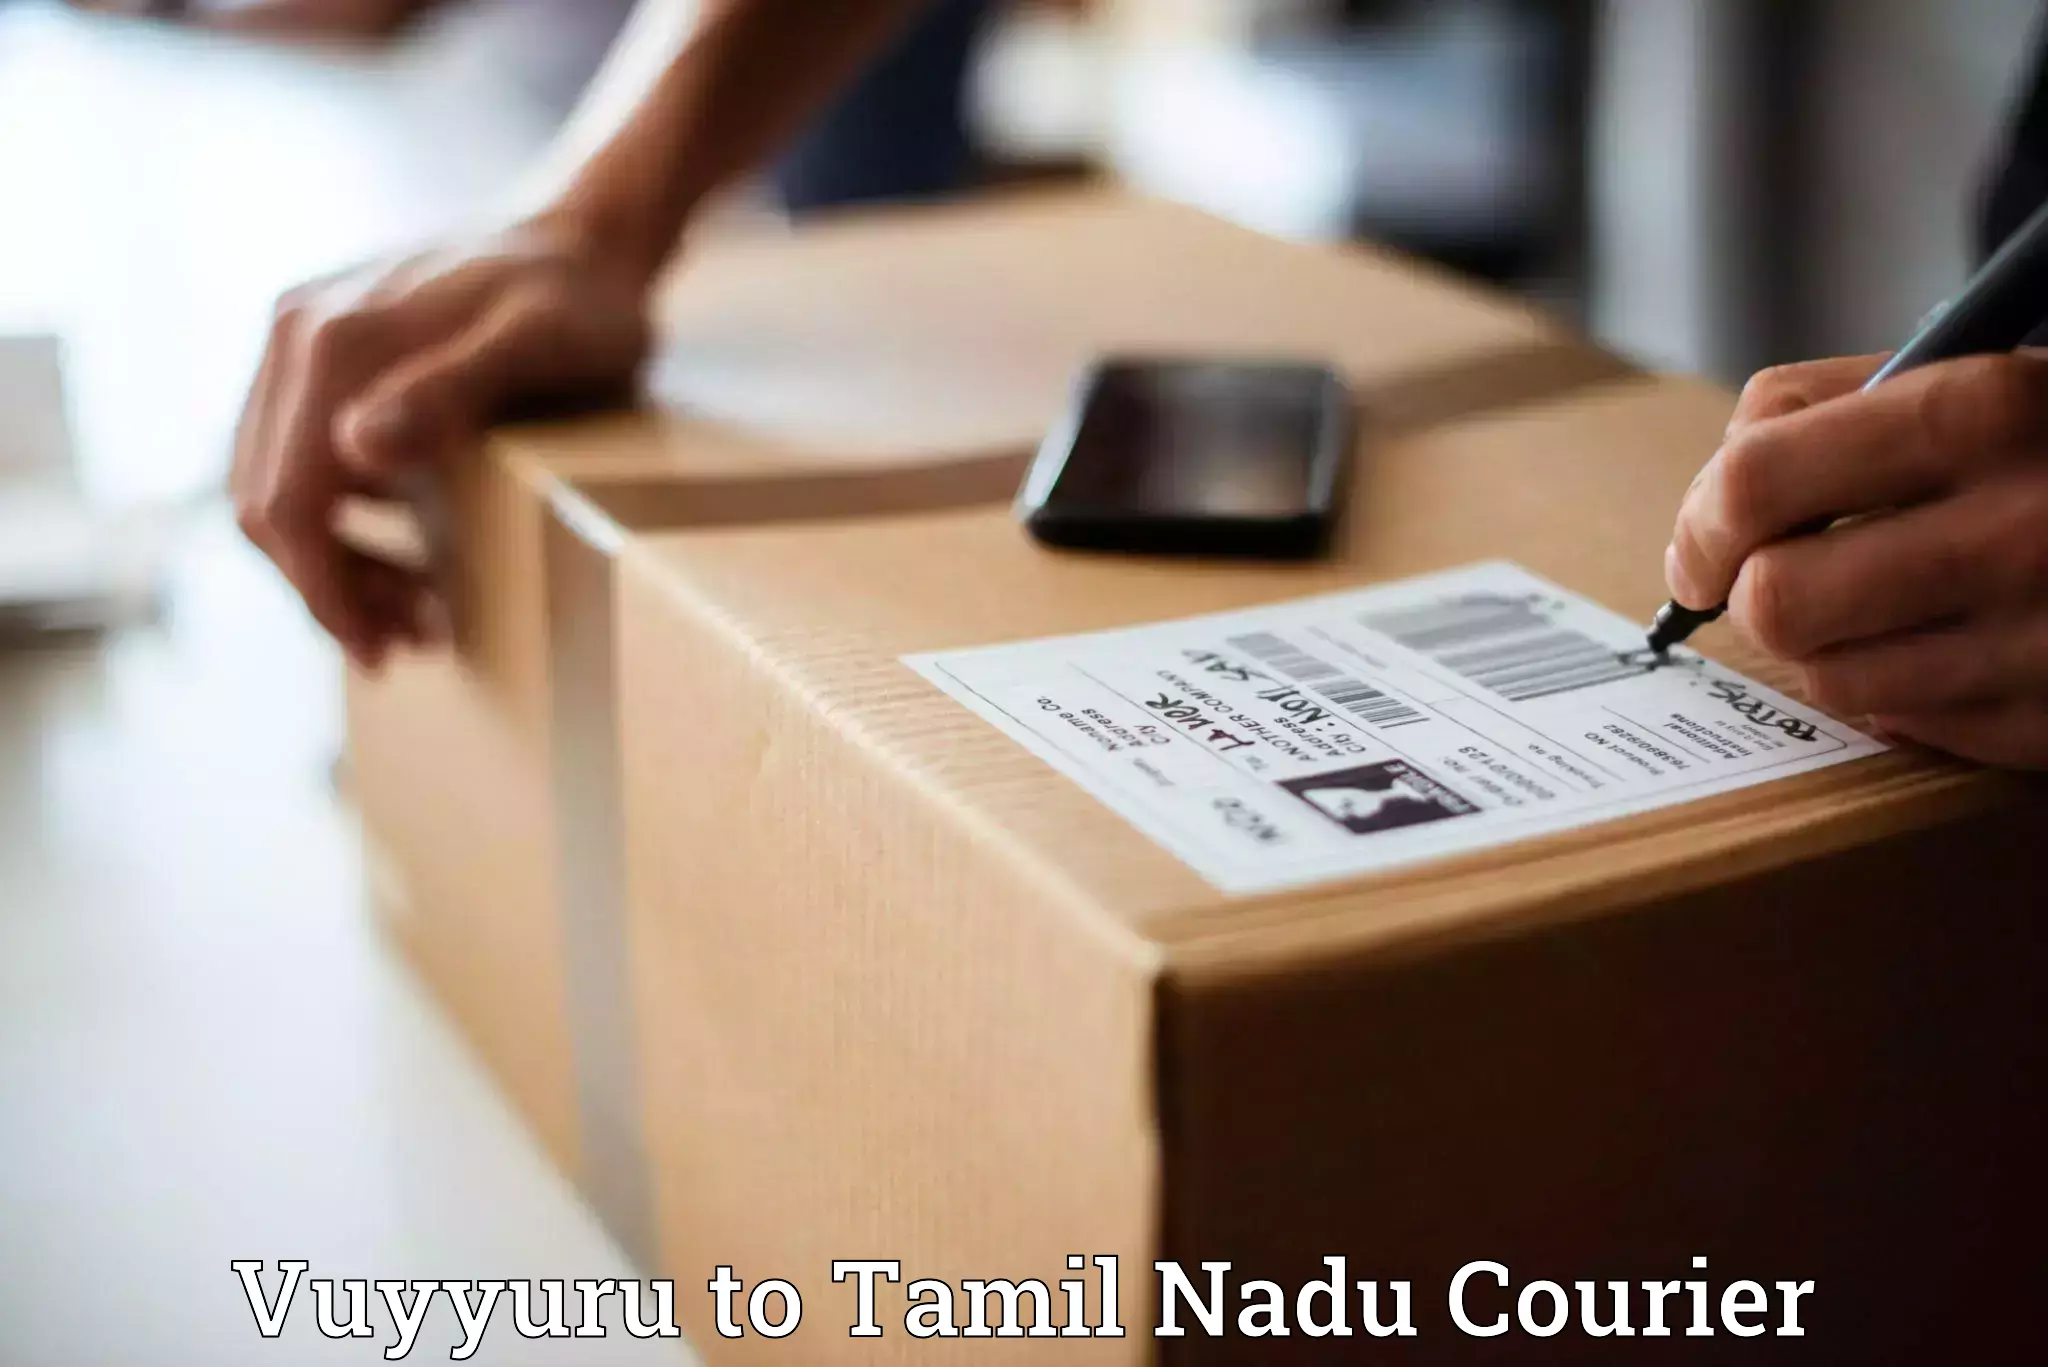 Automated parcel services Vuyyuru to Anthiyur